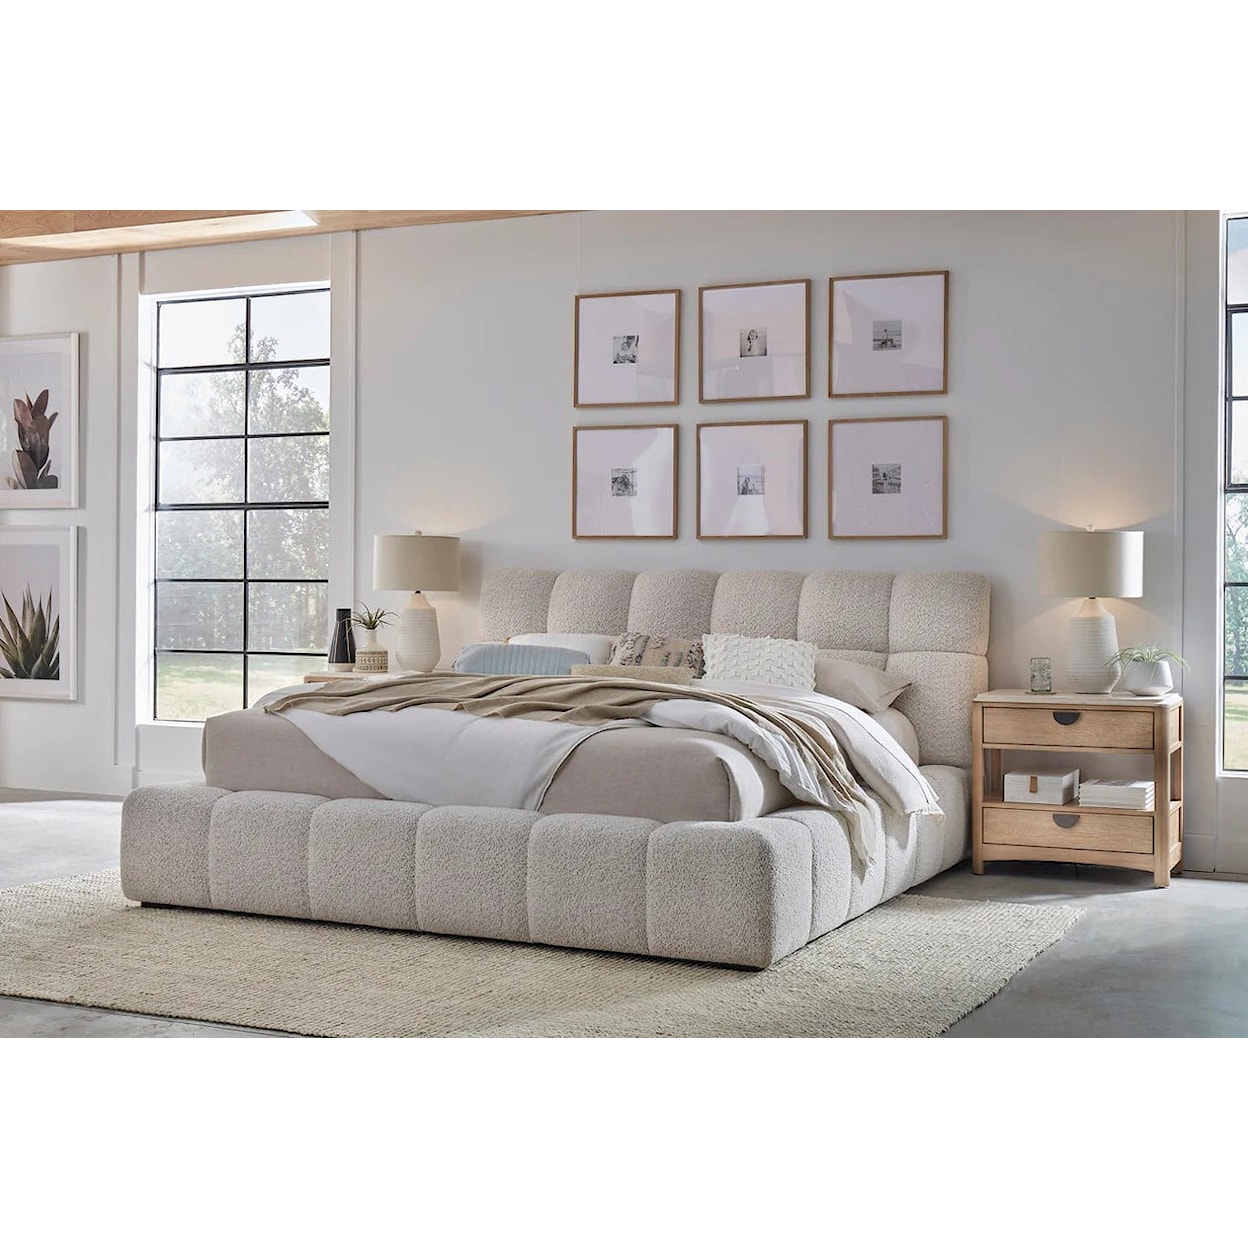 Paramount Living Escape Queen Upholstered Panel Bed